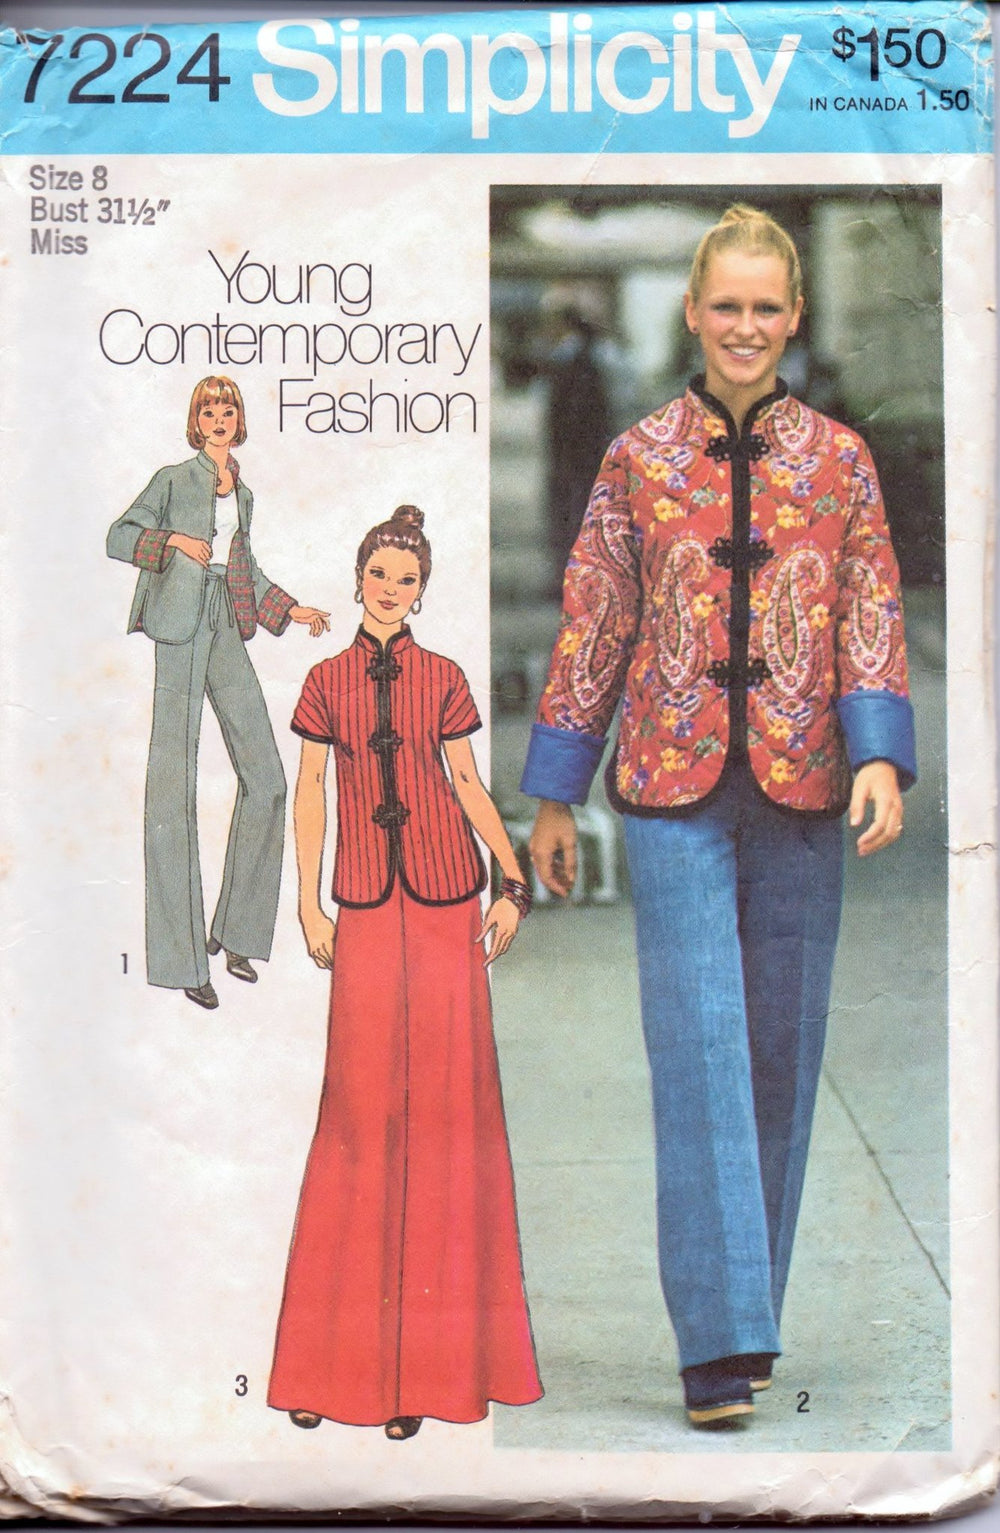 Simplicity 7224 Ladies Jacket Skirt Pants Vintage 1970's Sewing Pattern Young Contemporary Fashion - VintageStitching - Vintage Sewing Patterns